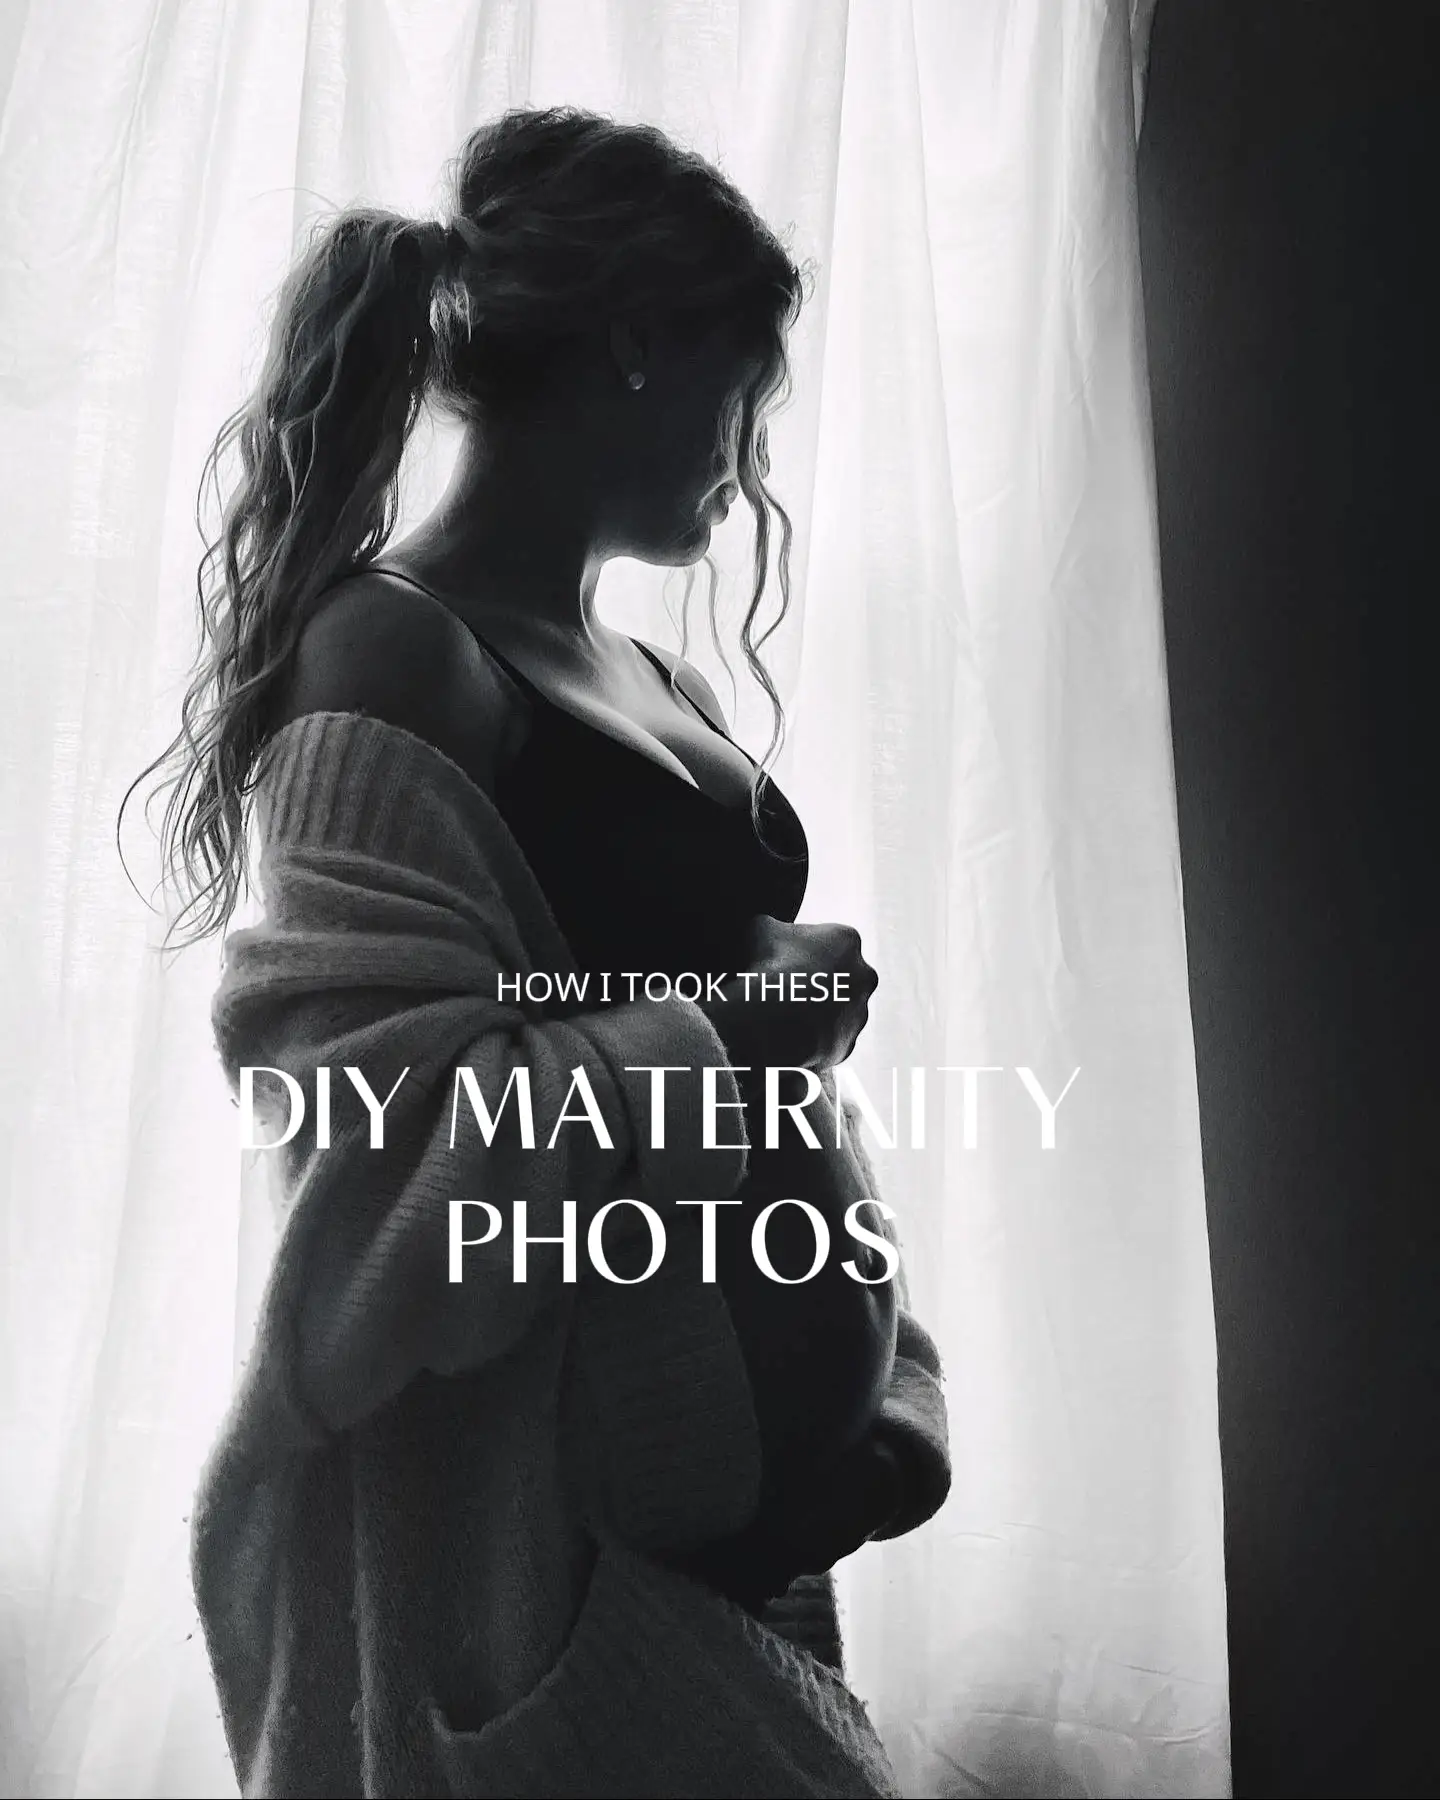 City maternity shoots get a creative spin